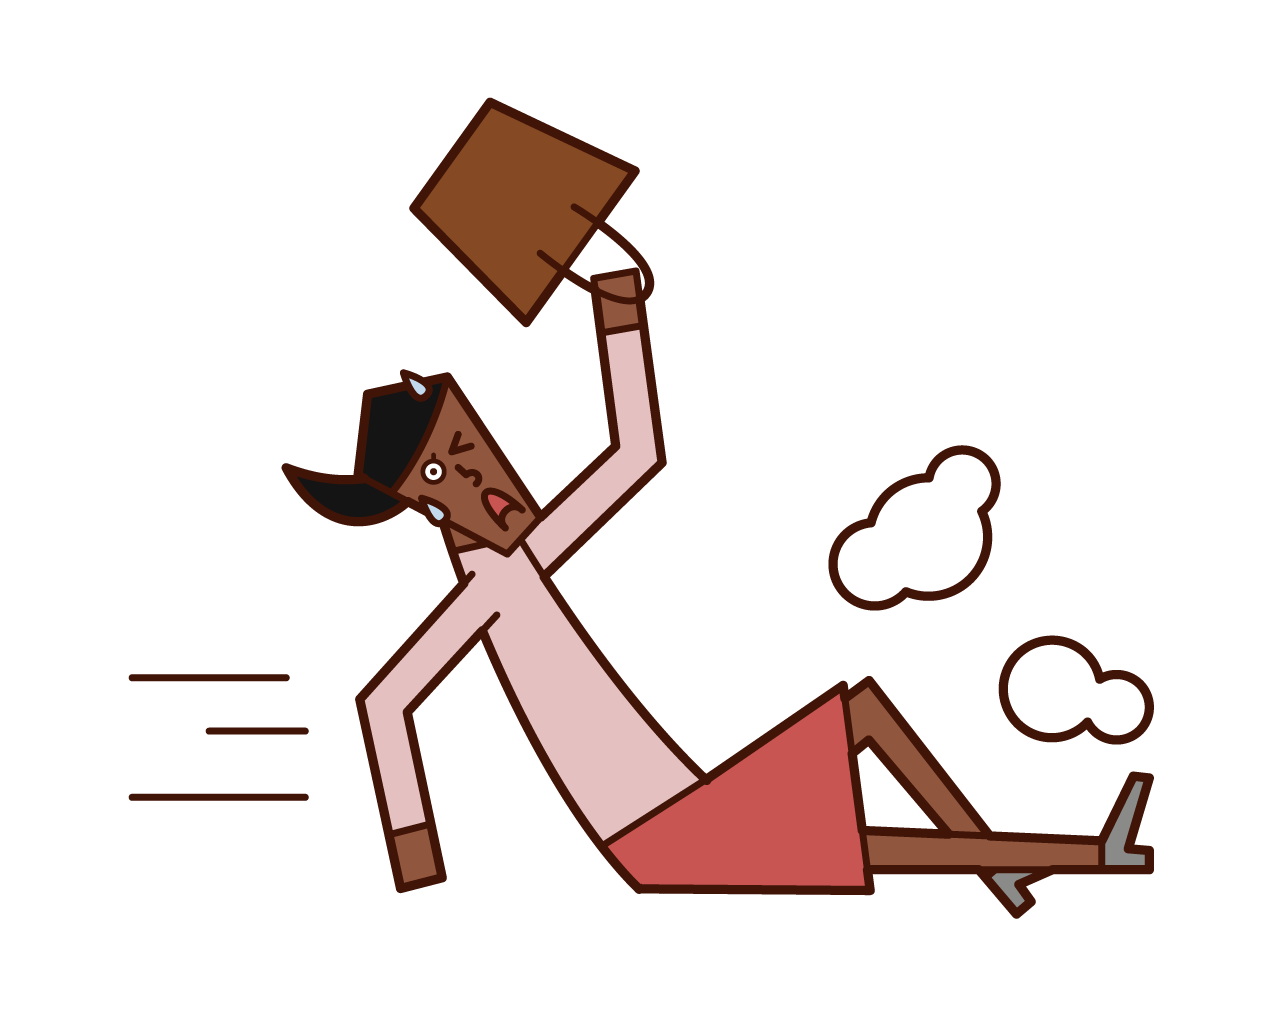 Illustration of a woman slipping in after being late